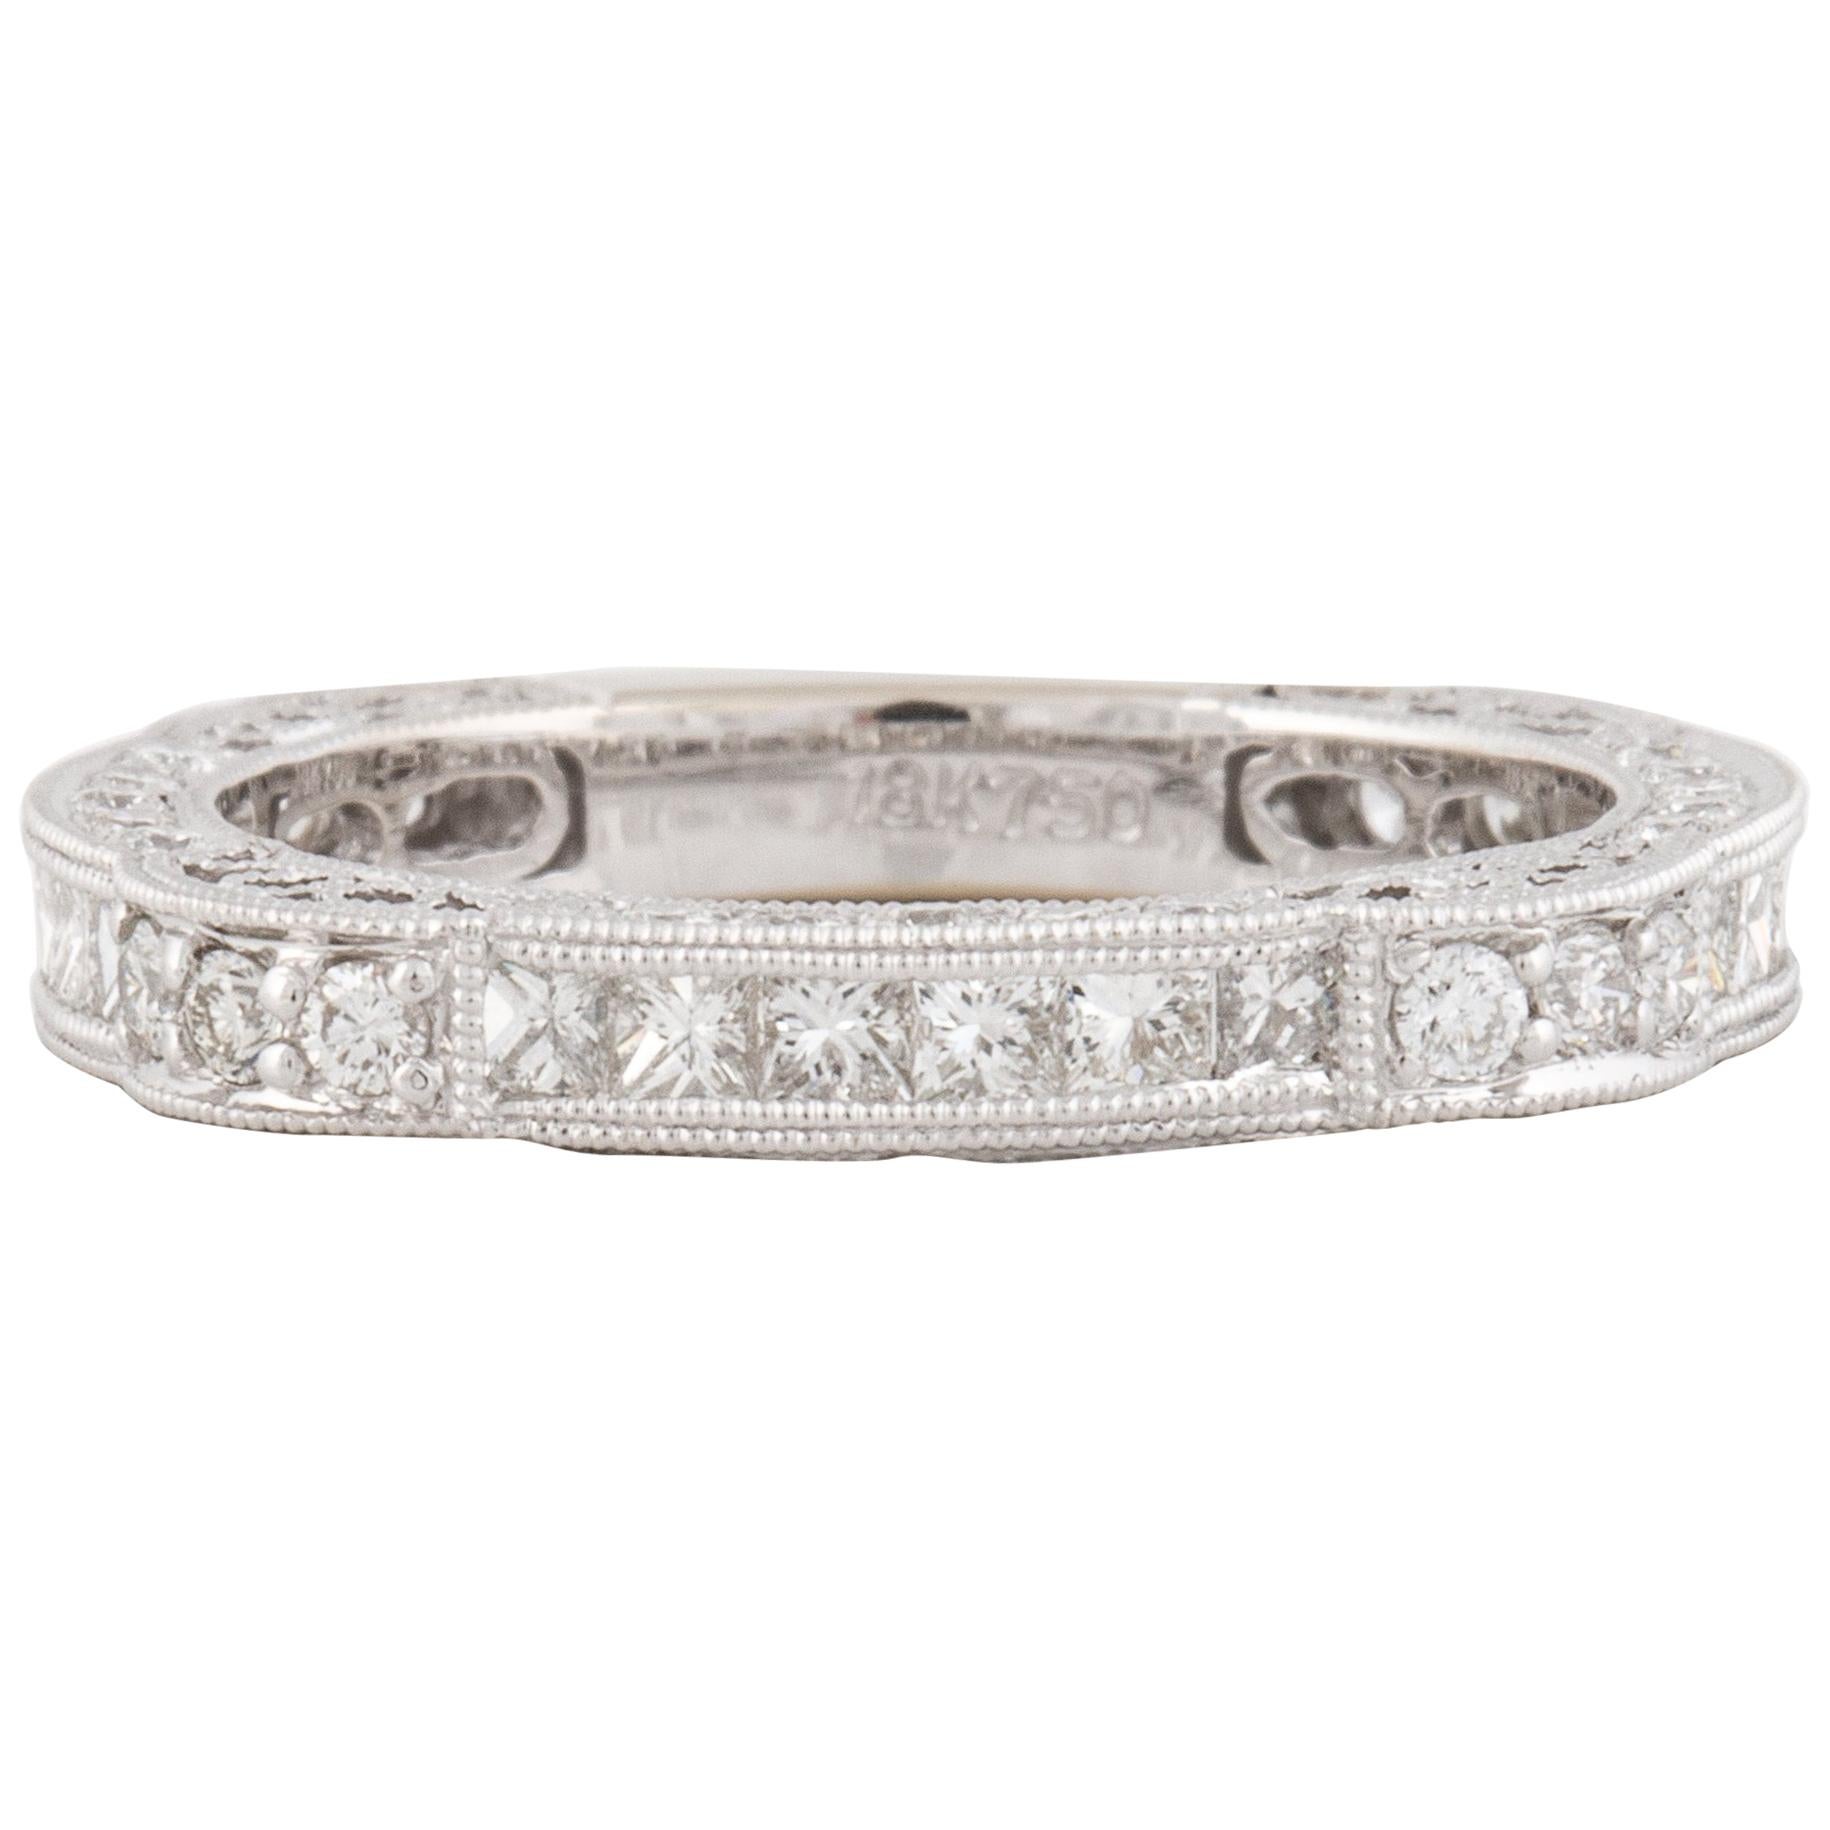 Mixed-Cut Diamond Eternity Band in 18K White Gold